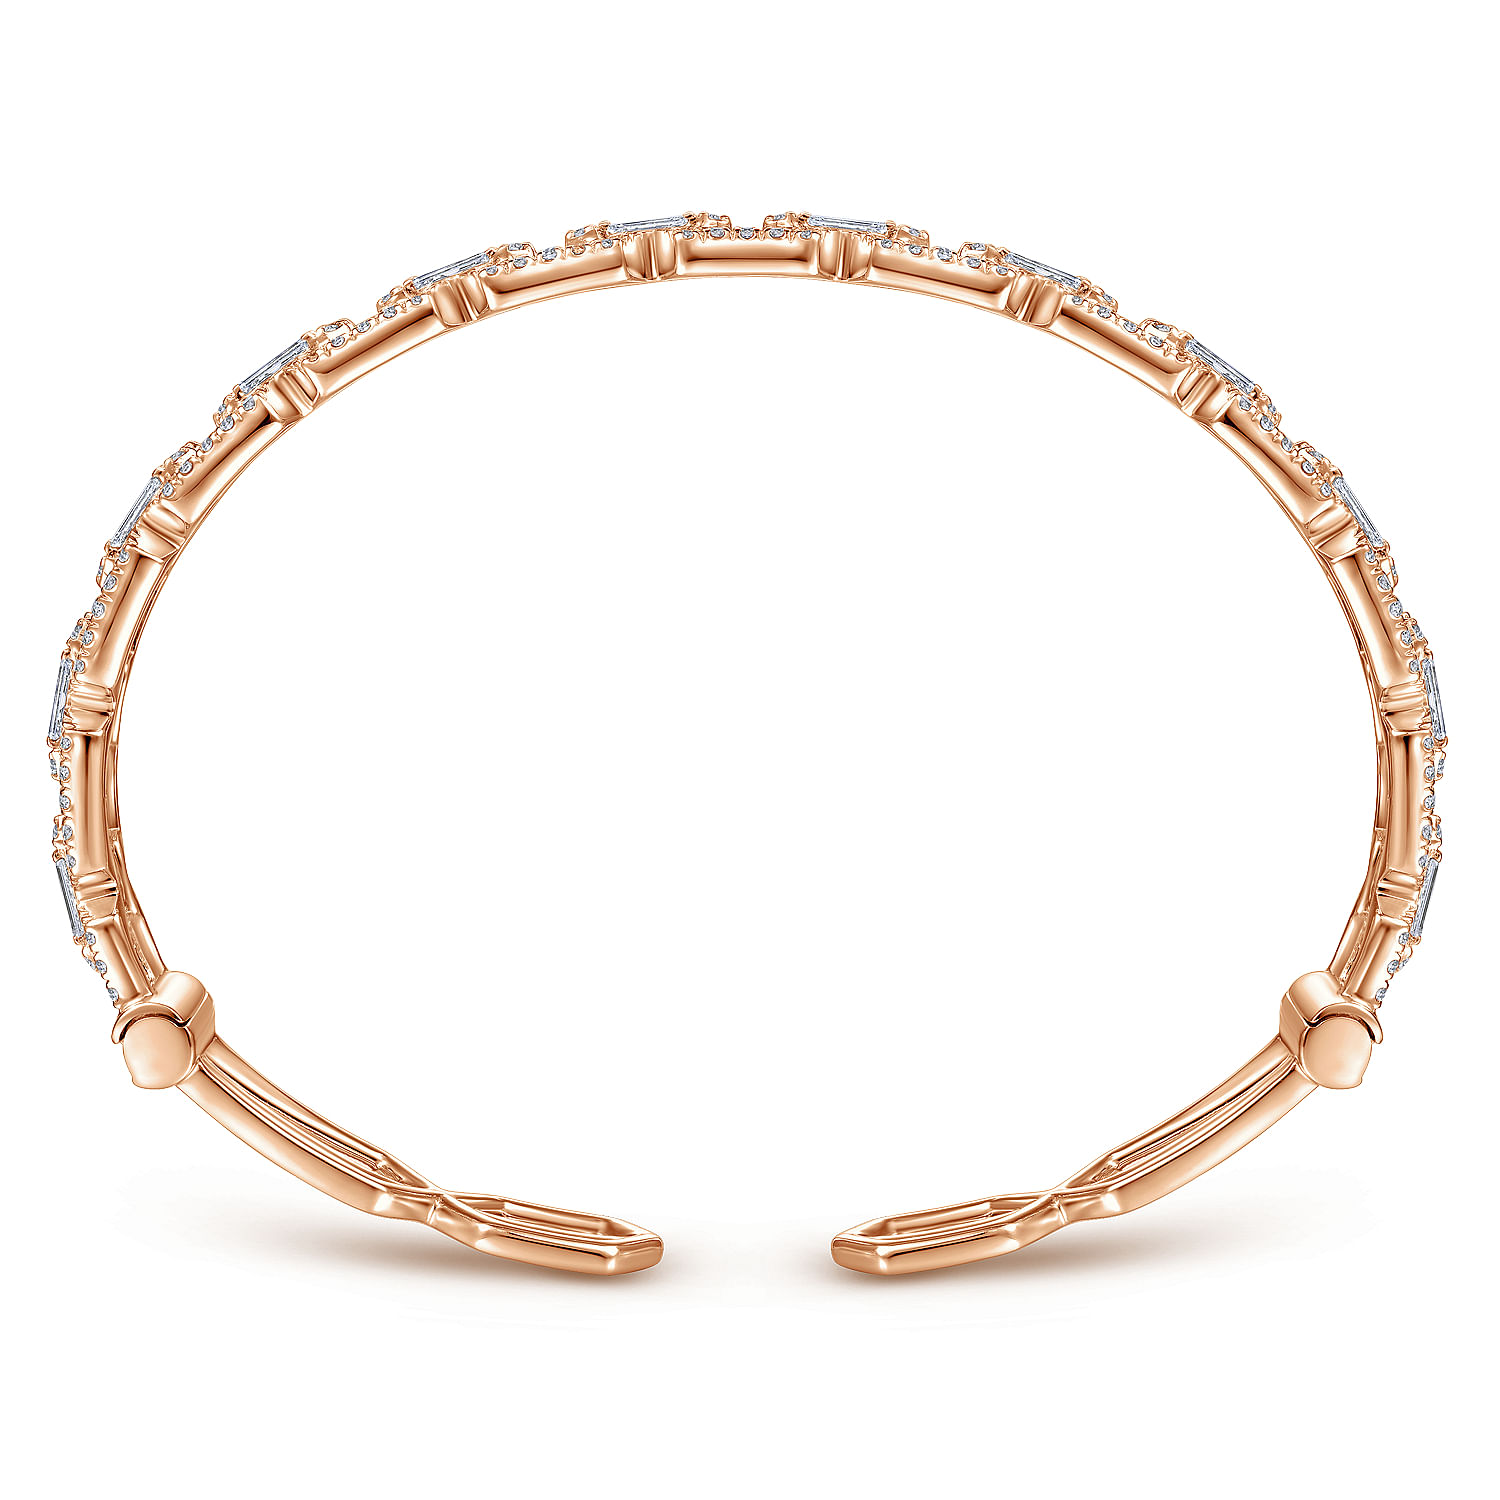 14K Rose Gold Diamond Chain Link Cuff Bracelet with Diamond Baguette Spacers